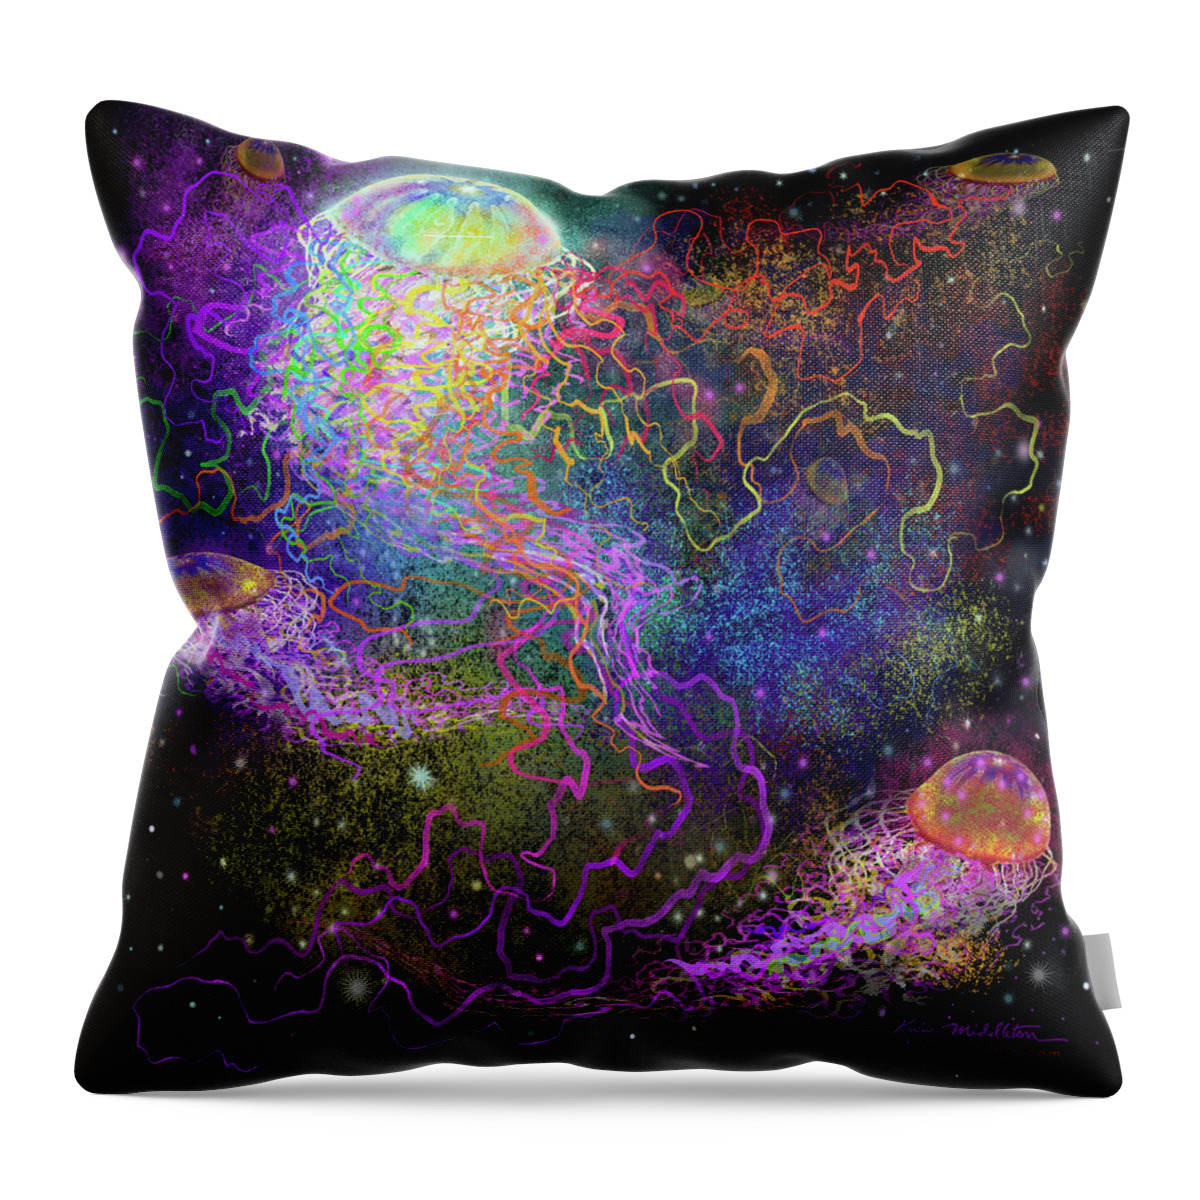 Cosmic Throw Pillow featuring the digital art Cosmic Celebration by Kevin Middleton